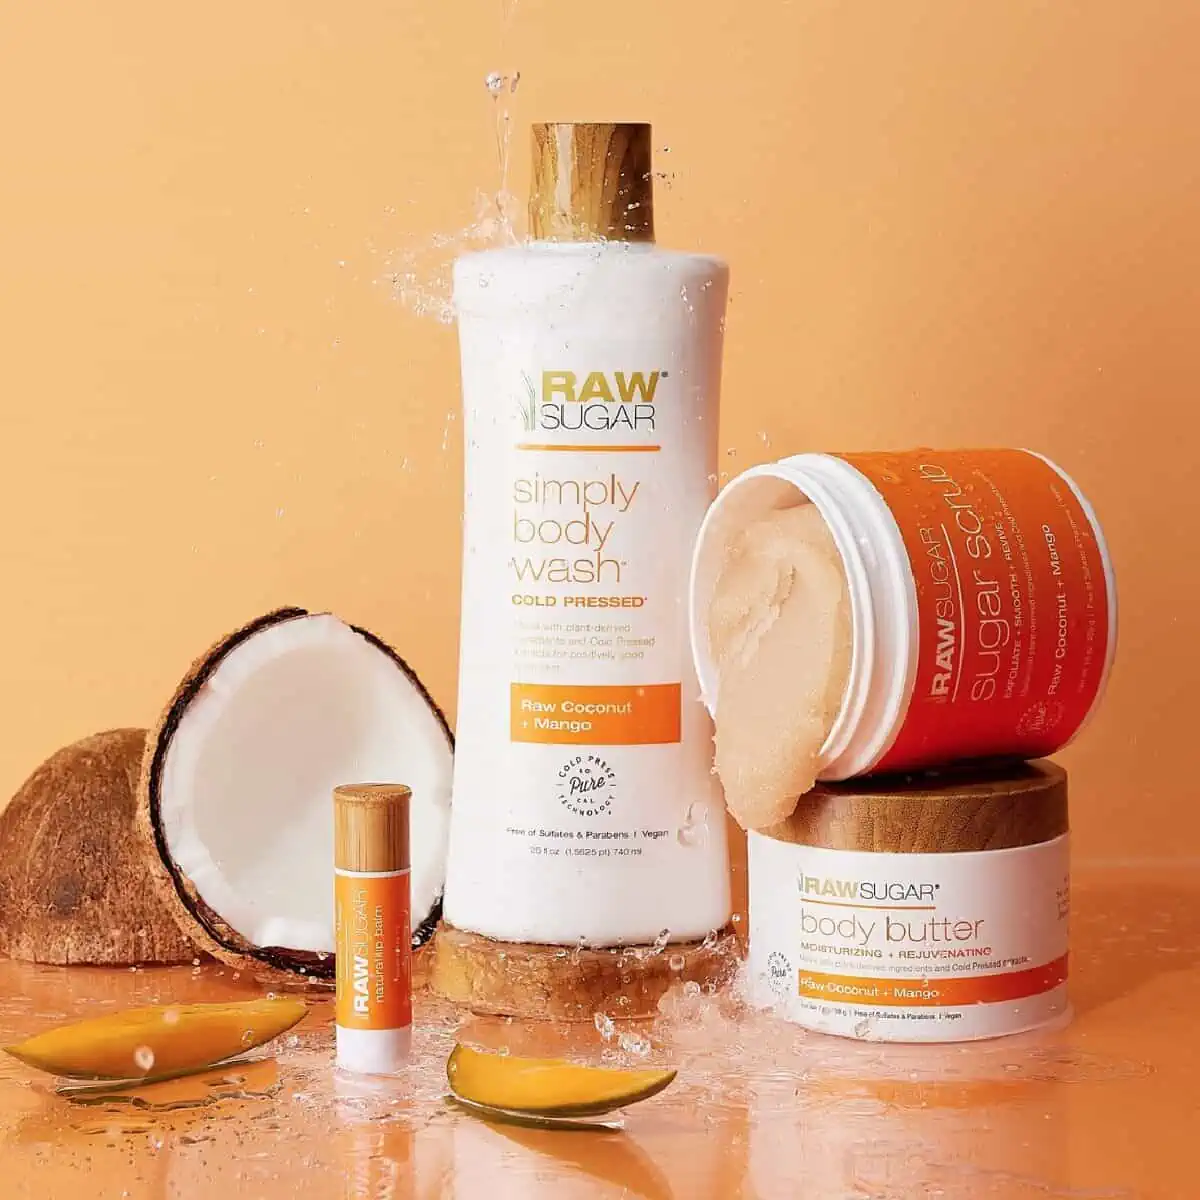 A white bottle of Raw Sugar Simple Body Wash next to two containers of body scrub, body butter, a lip balm and slices of coconut and mango against an orange background.  